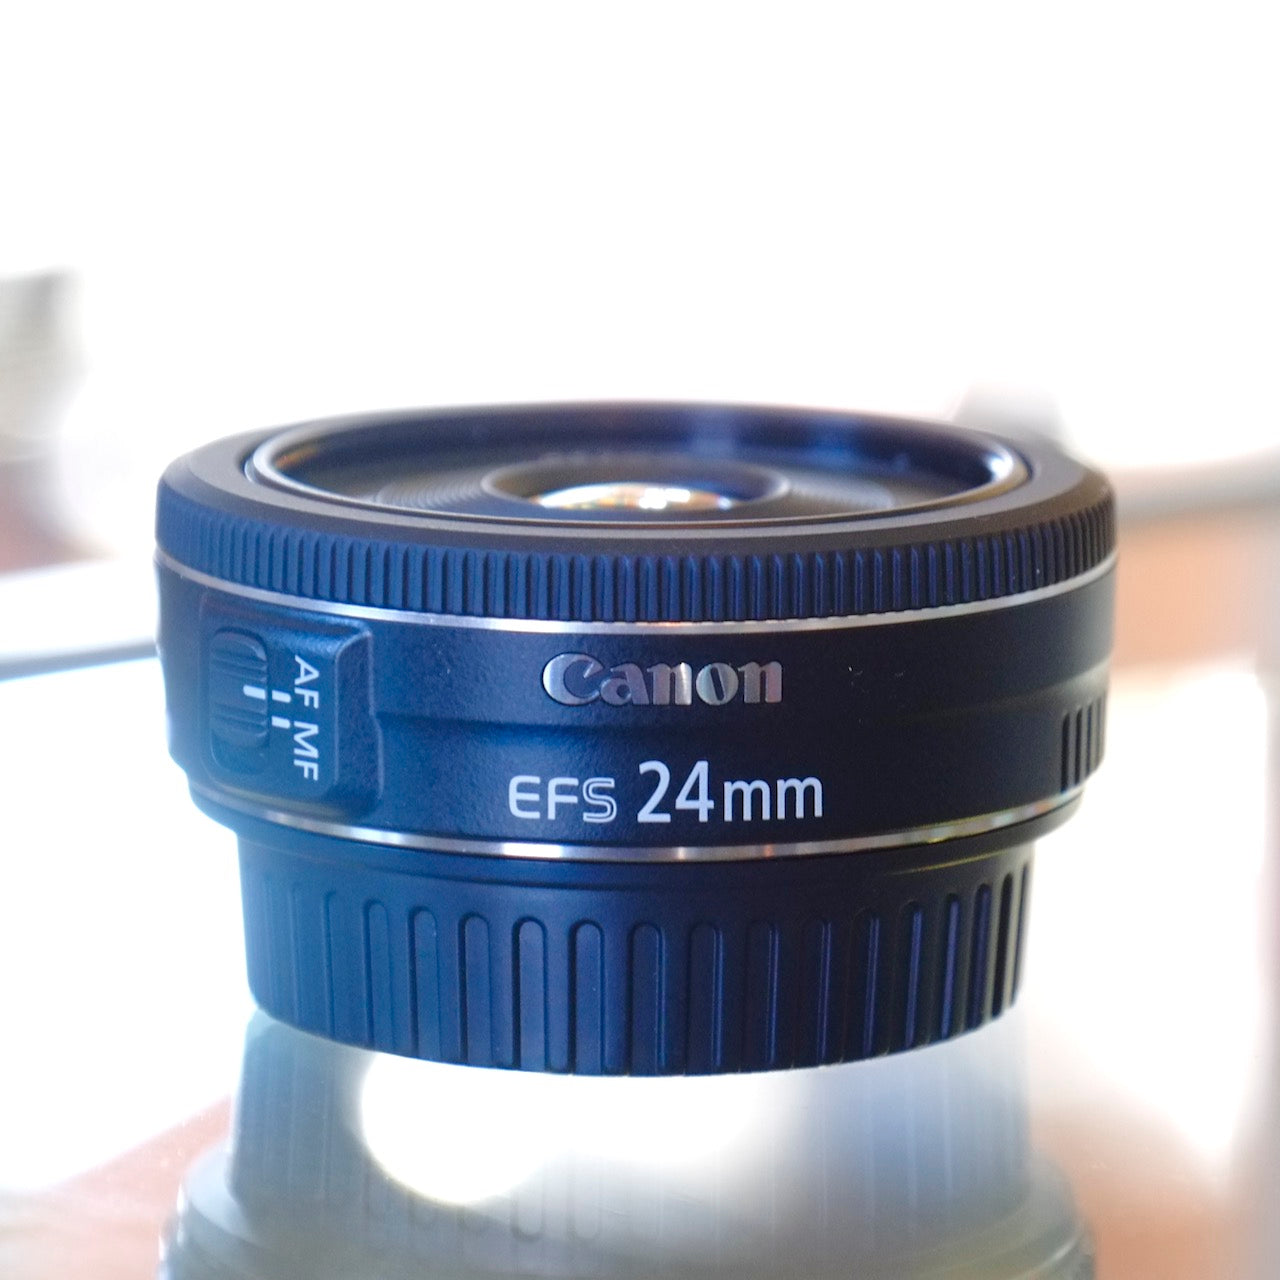 Canon EF-S 24mm f2.8 STM